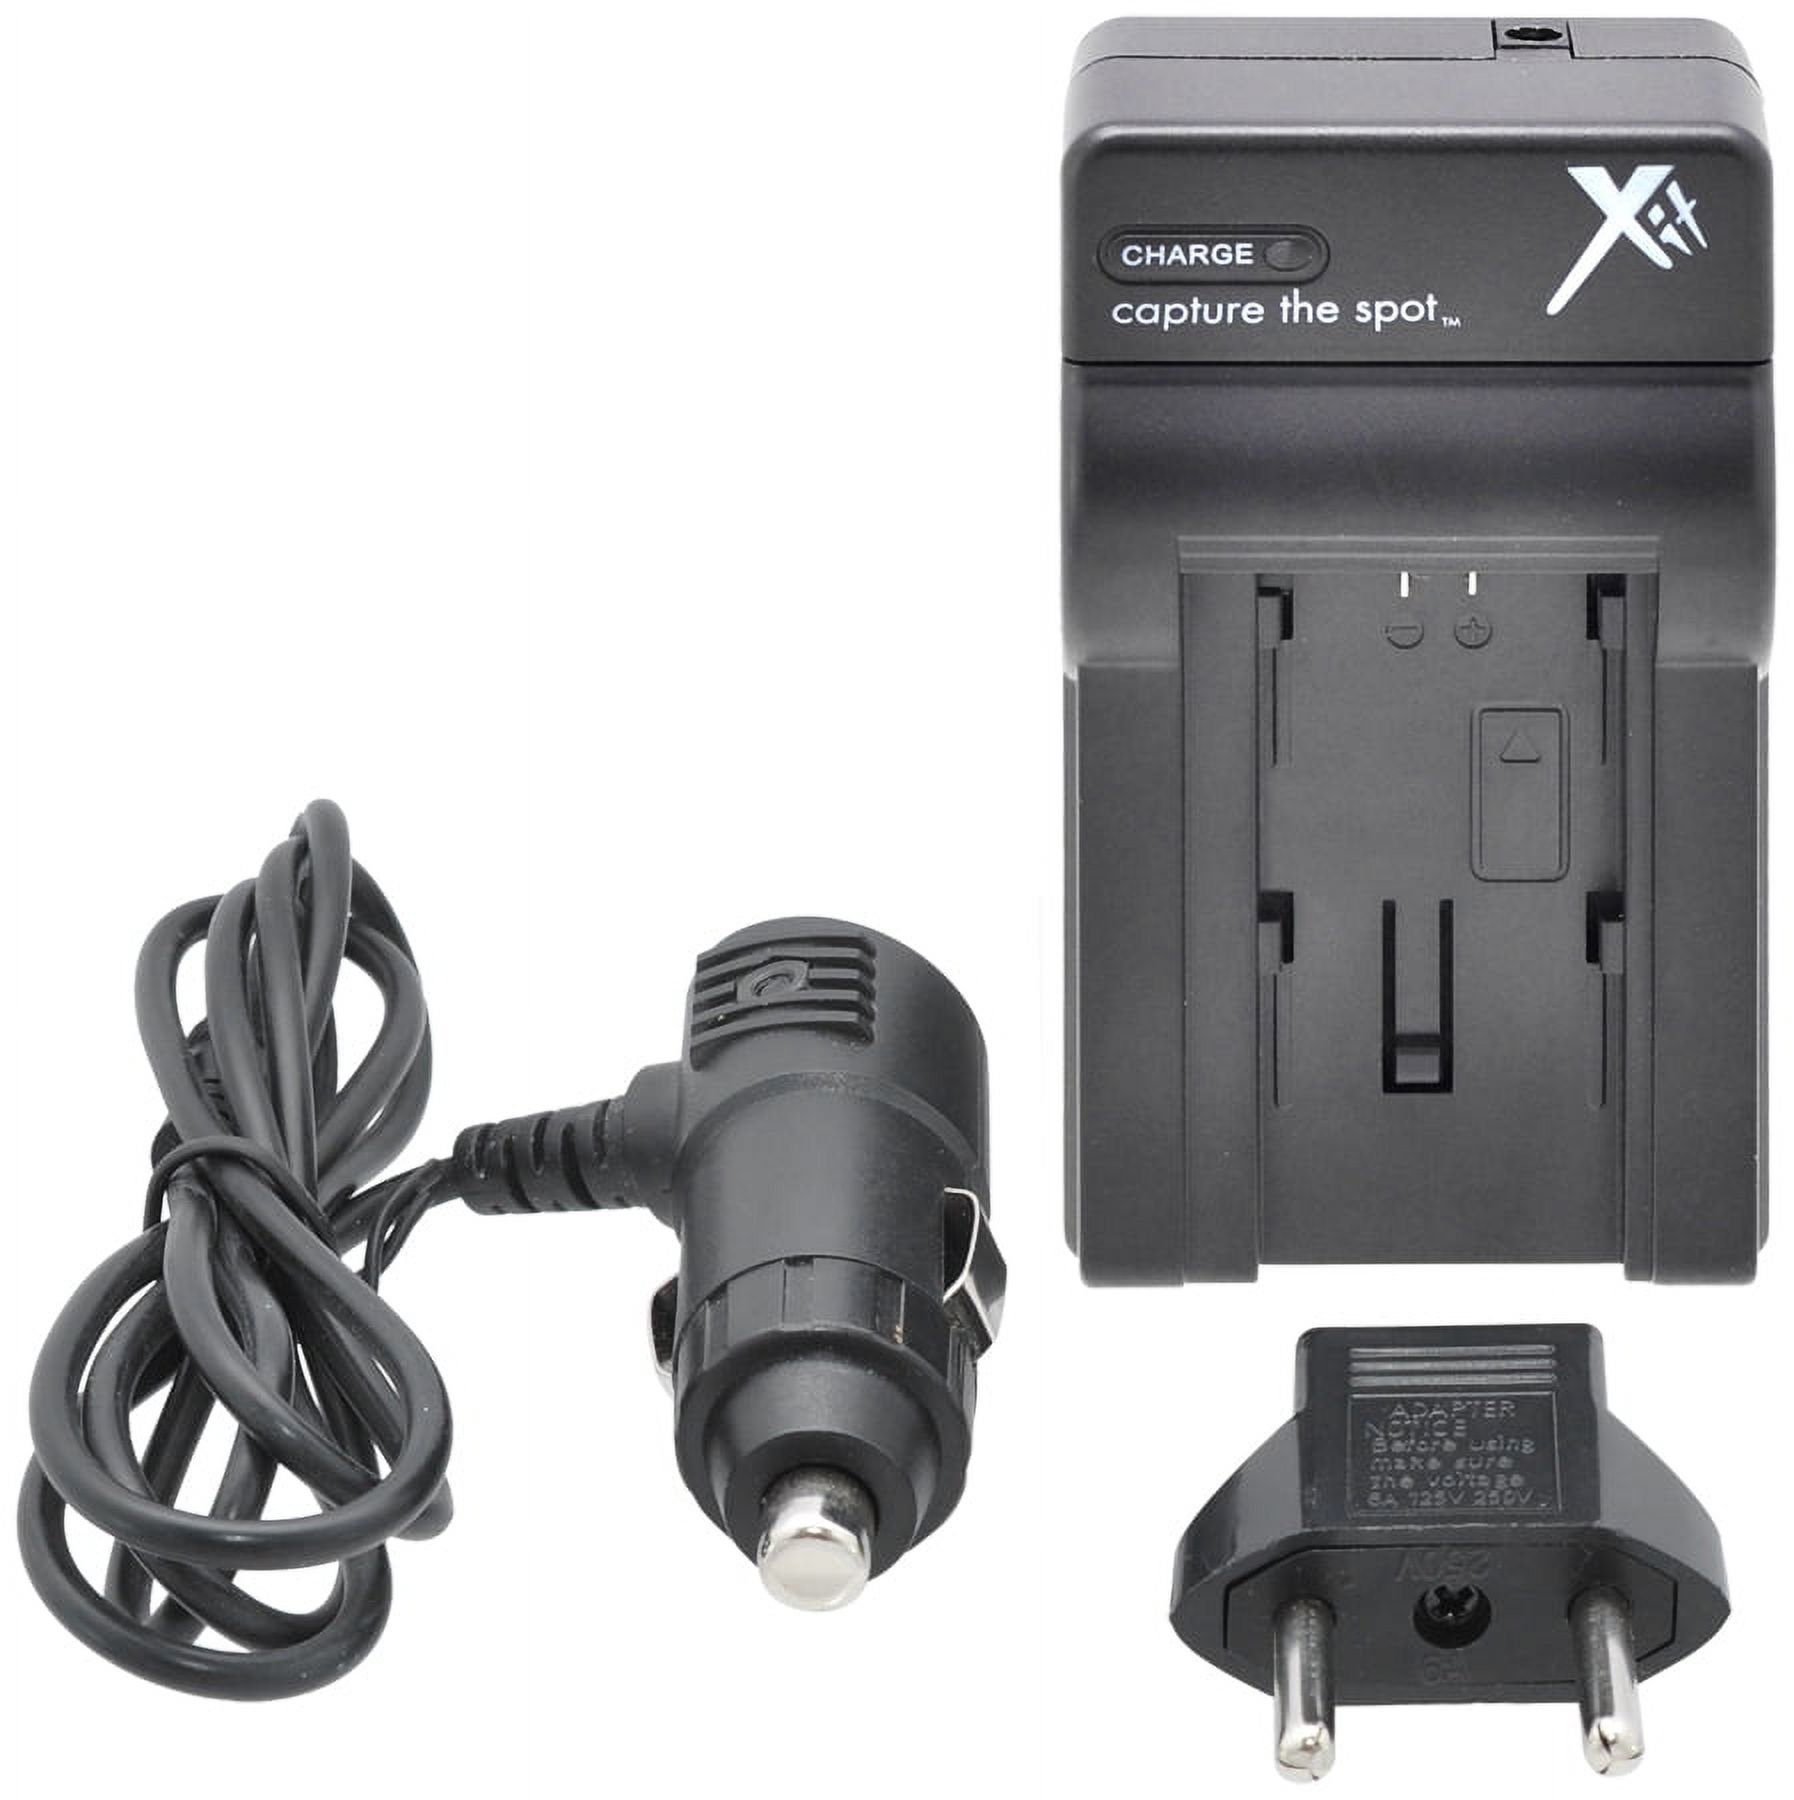 XIT worldwide AC/DC travel charger 110-220V F/CANON NB-11L - image 1 of 2